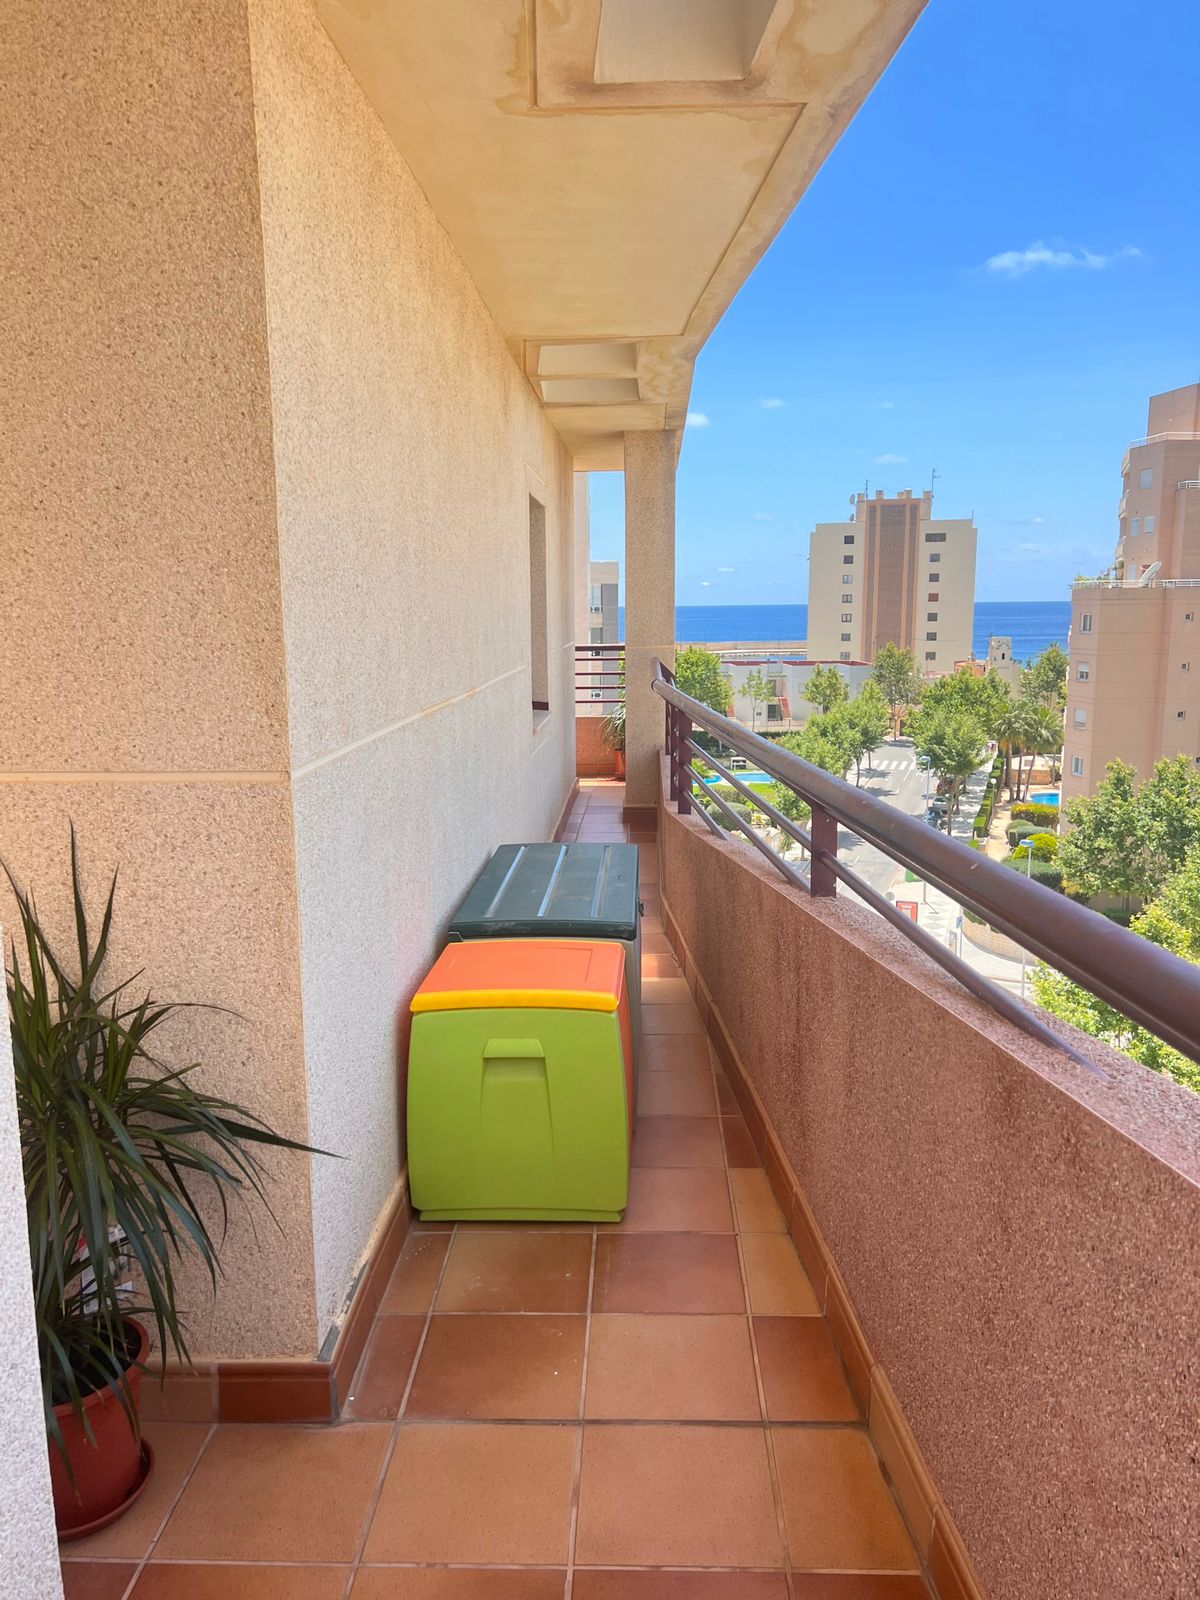 APARTMENT IN THE PORT AREA IN CALPE